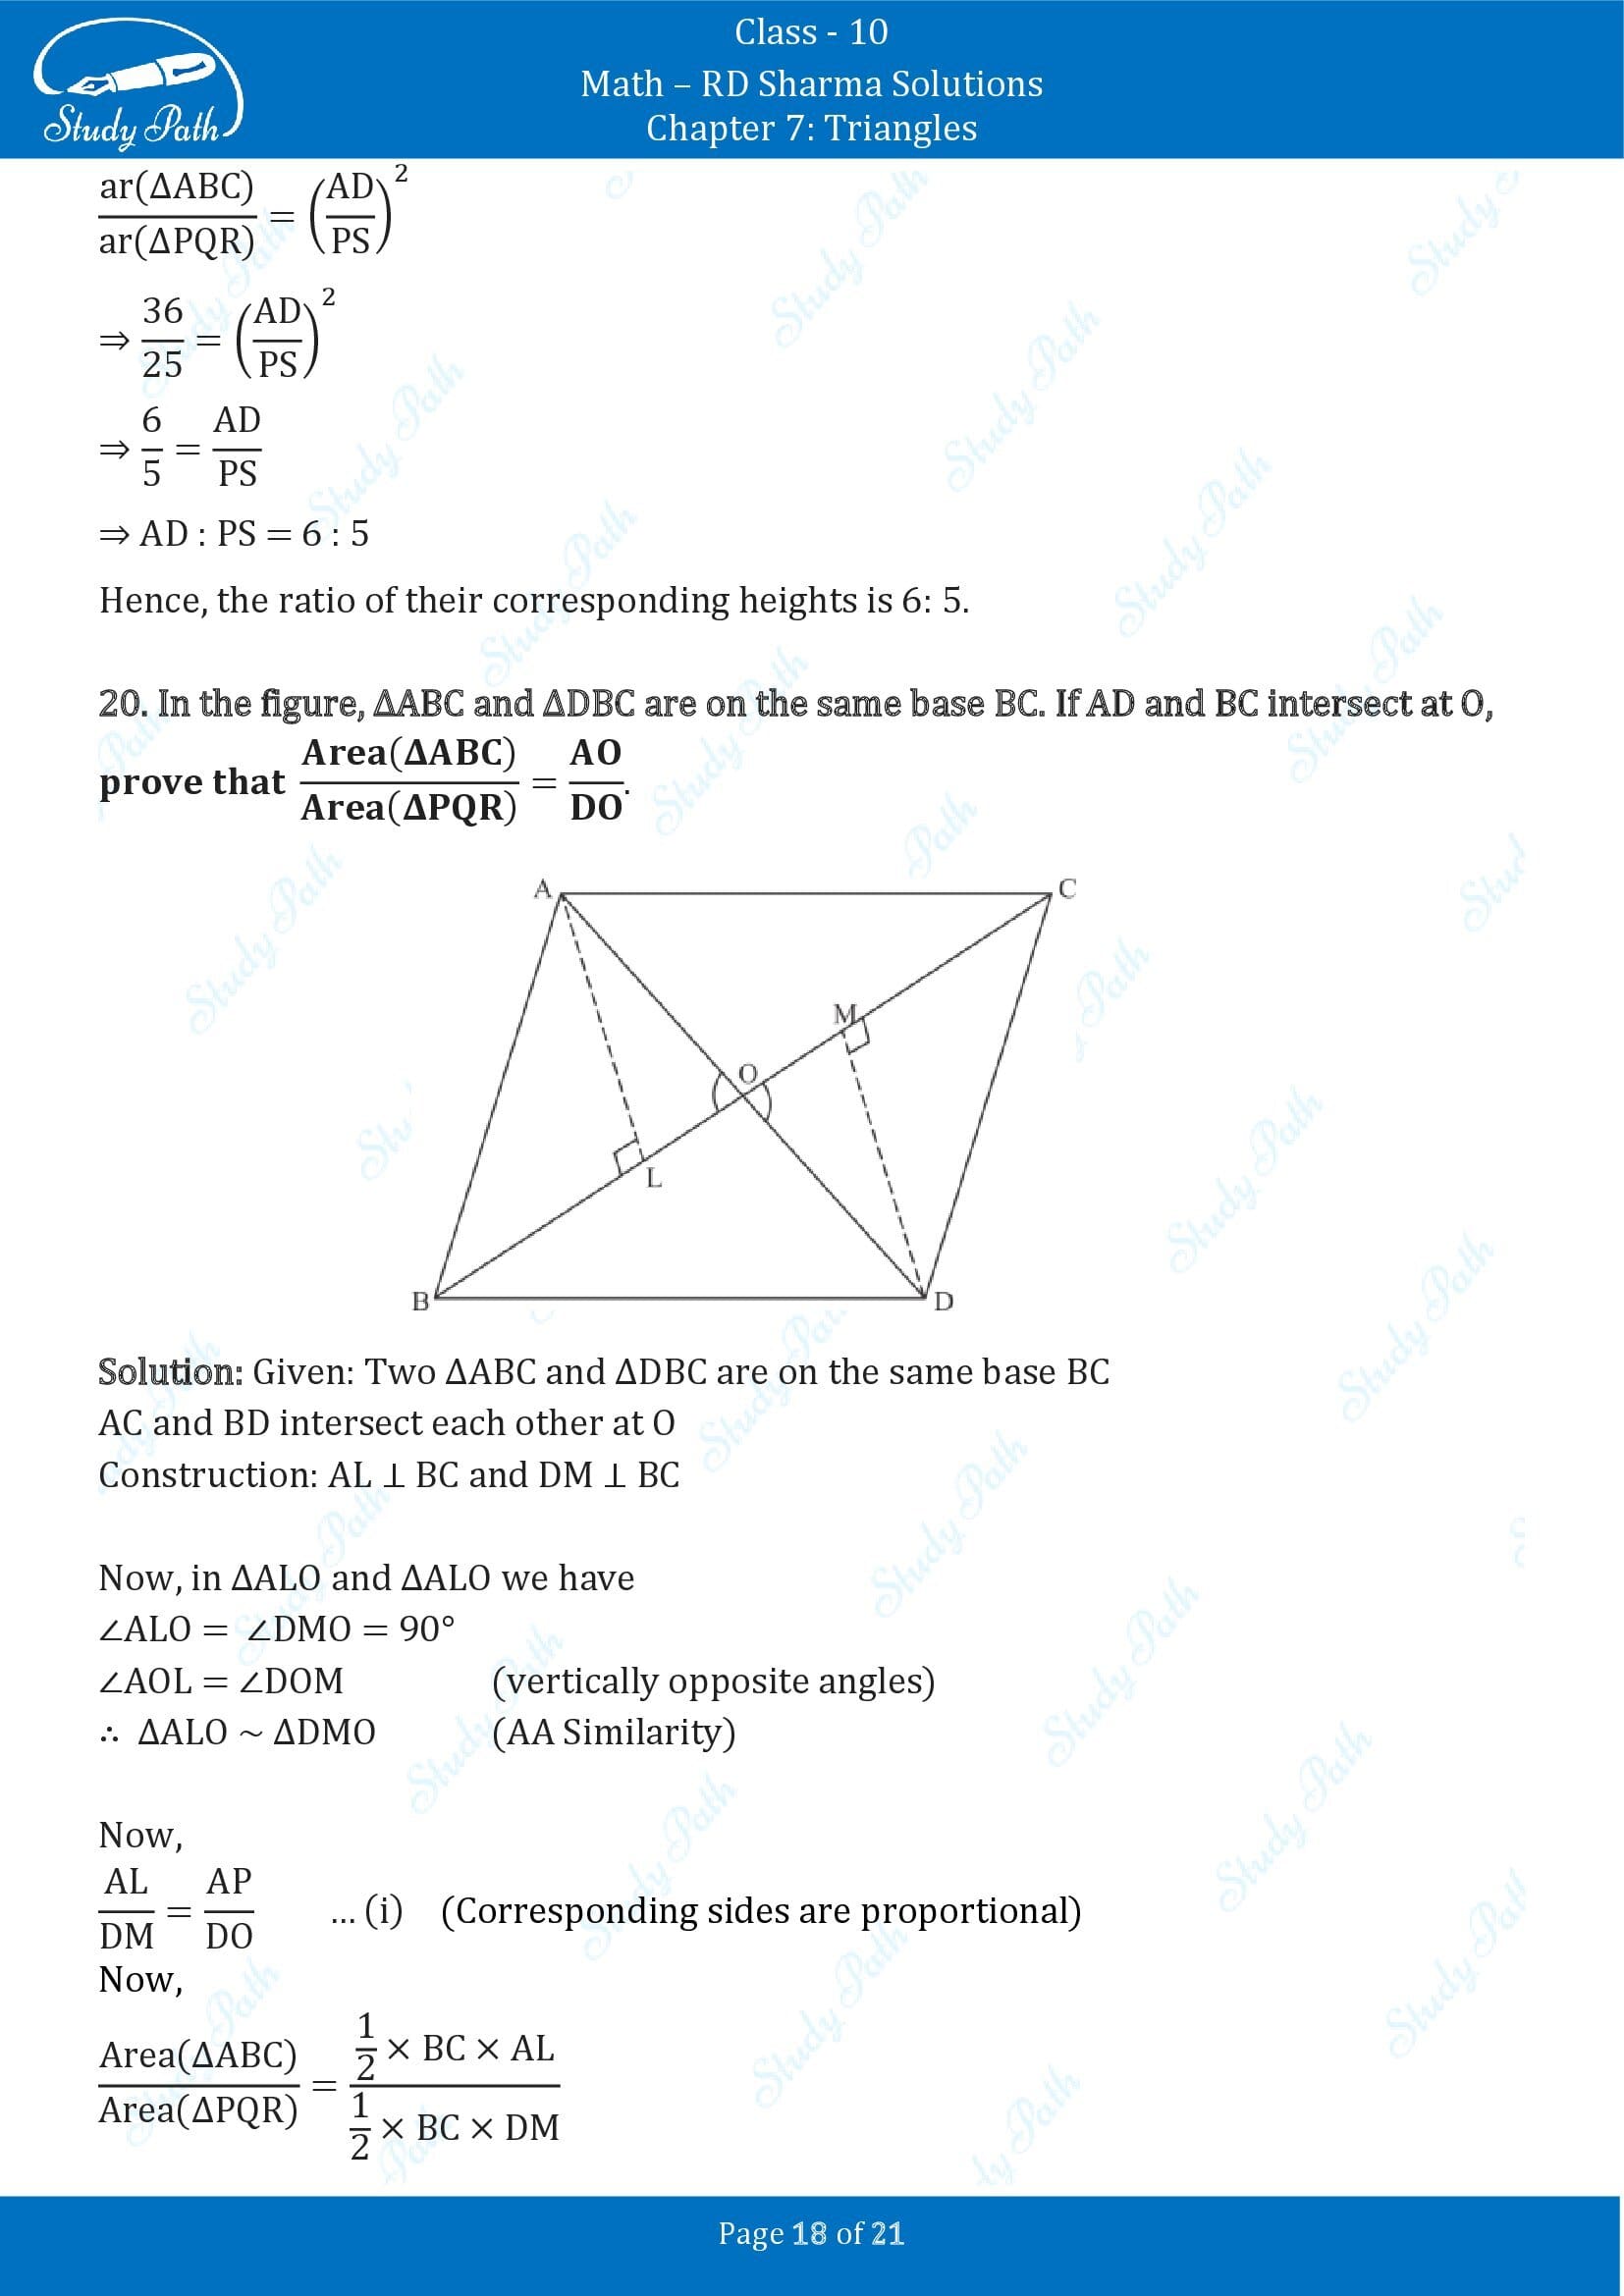 RD Sharma Solutions Class 10 Chapter 7 Triangles Exercise 7.6 00018